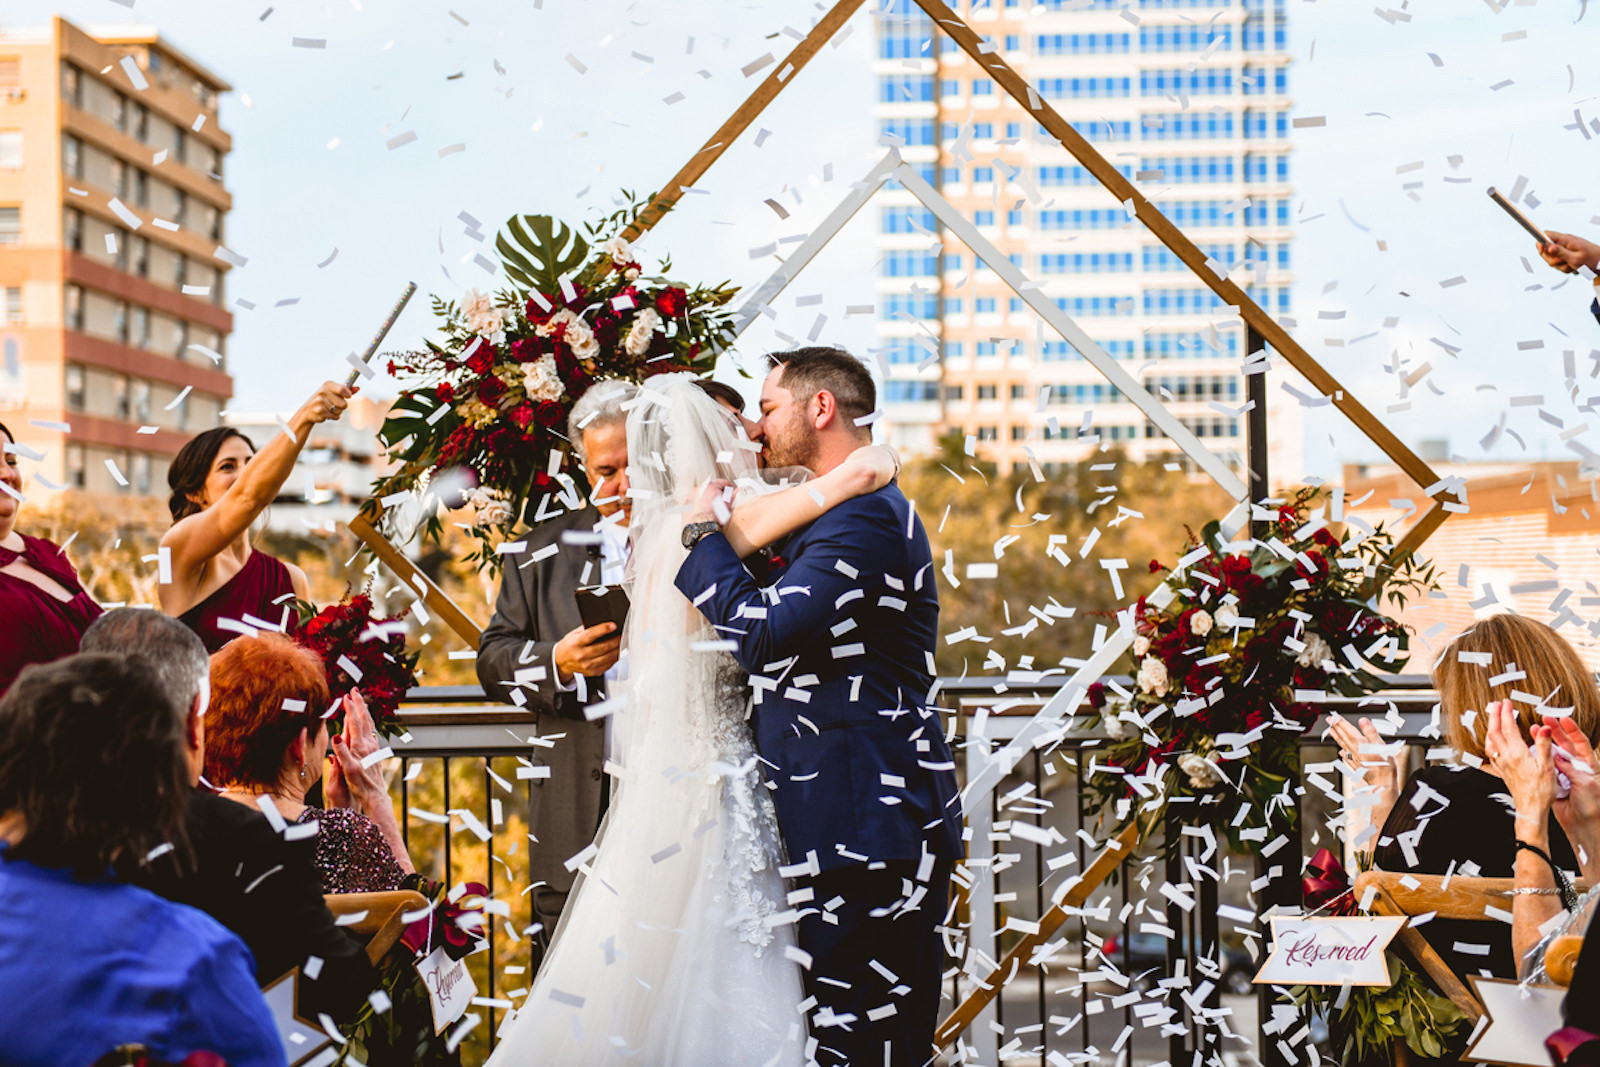 Bride and Groom Exchanging Firs Kiss as Bride and Groom During Rooftop Ceremony in Front of Geometric Sculpture Confetti Photo | Tampa Bay Wedding Planner Special Moments Event Planning | Downtown St. Pete Wedding Venue Red Mesa Events